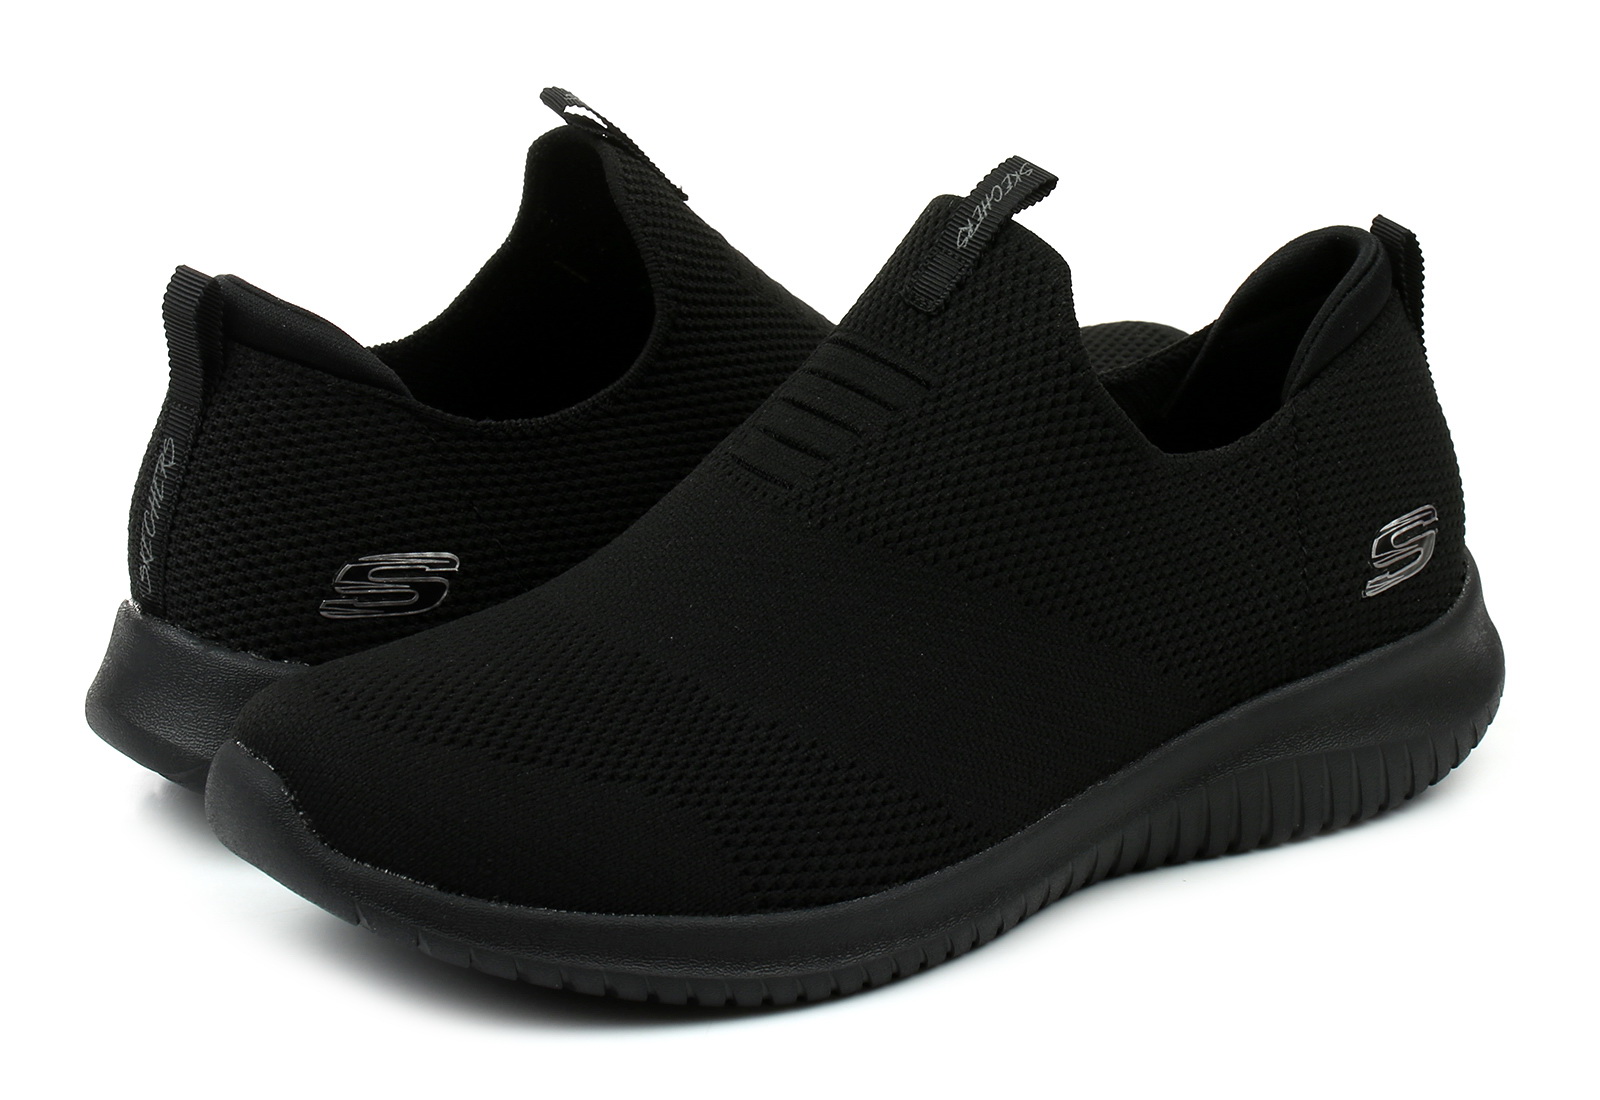 Skechers Slip-ons - Ultra Flex-first Take - - Online shop for sneakers, shoes and boots